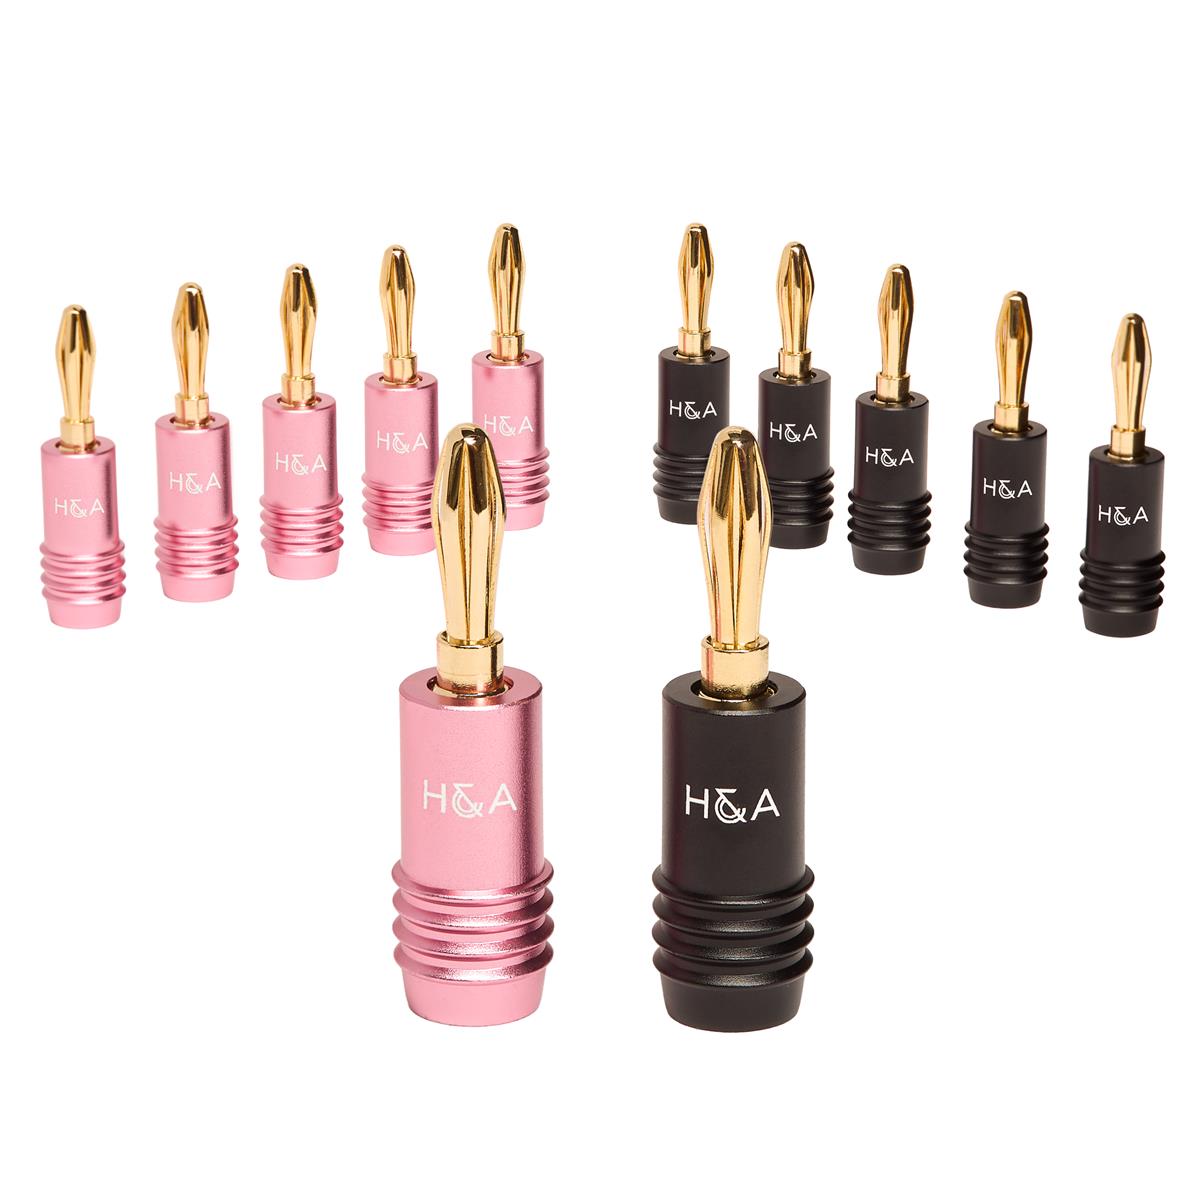 Image of H&amp;A Speaker Connector Banana Plugs